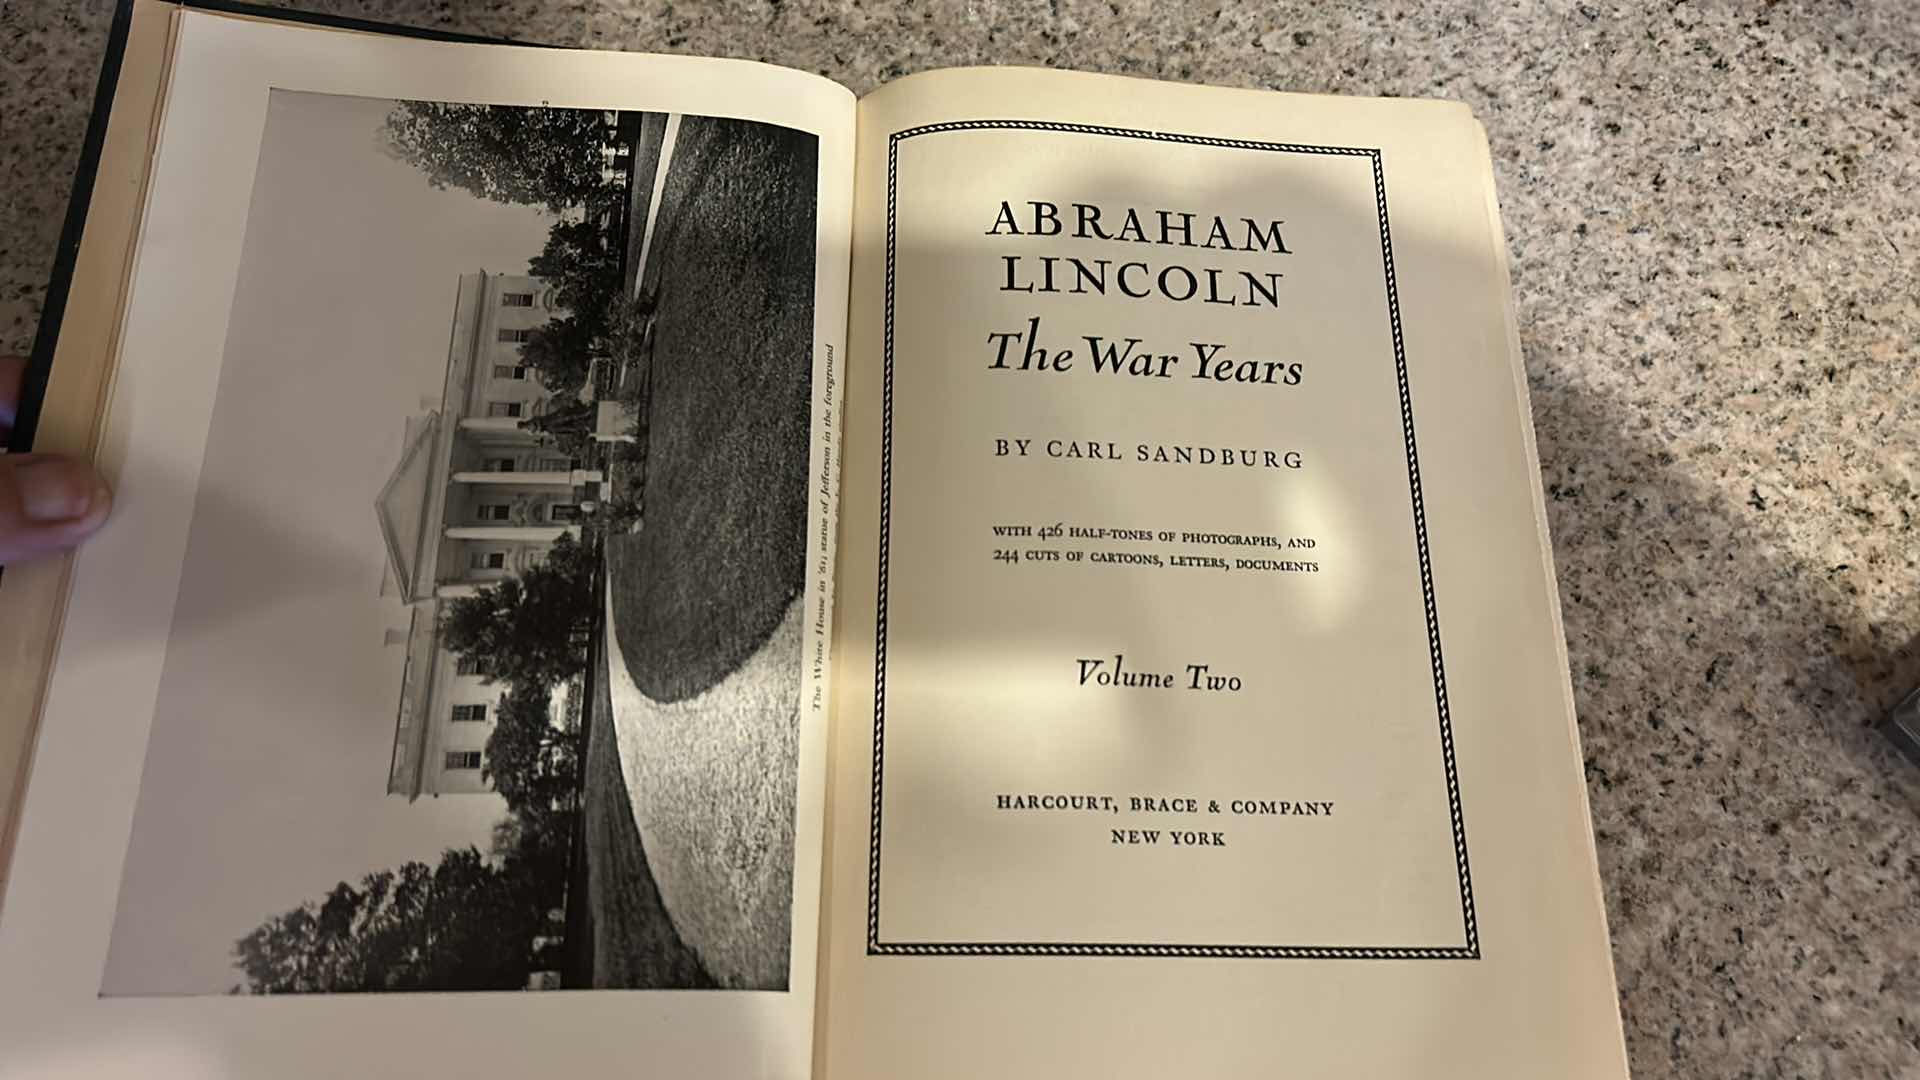 Photo 4 of 4 HARDCOVER BOOKS ABRAHAM LINCOLN THE WAR YEARS BY CARL SANDBURG